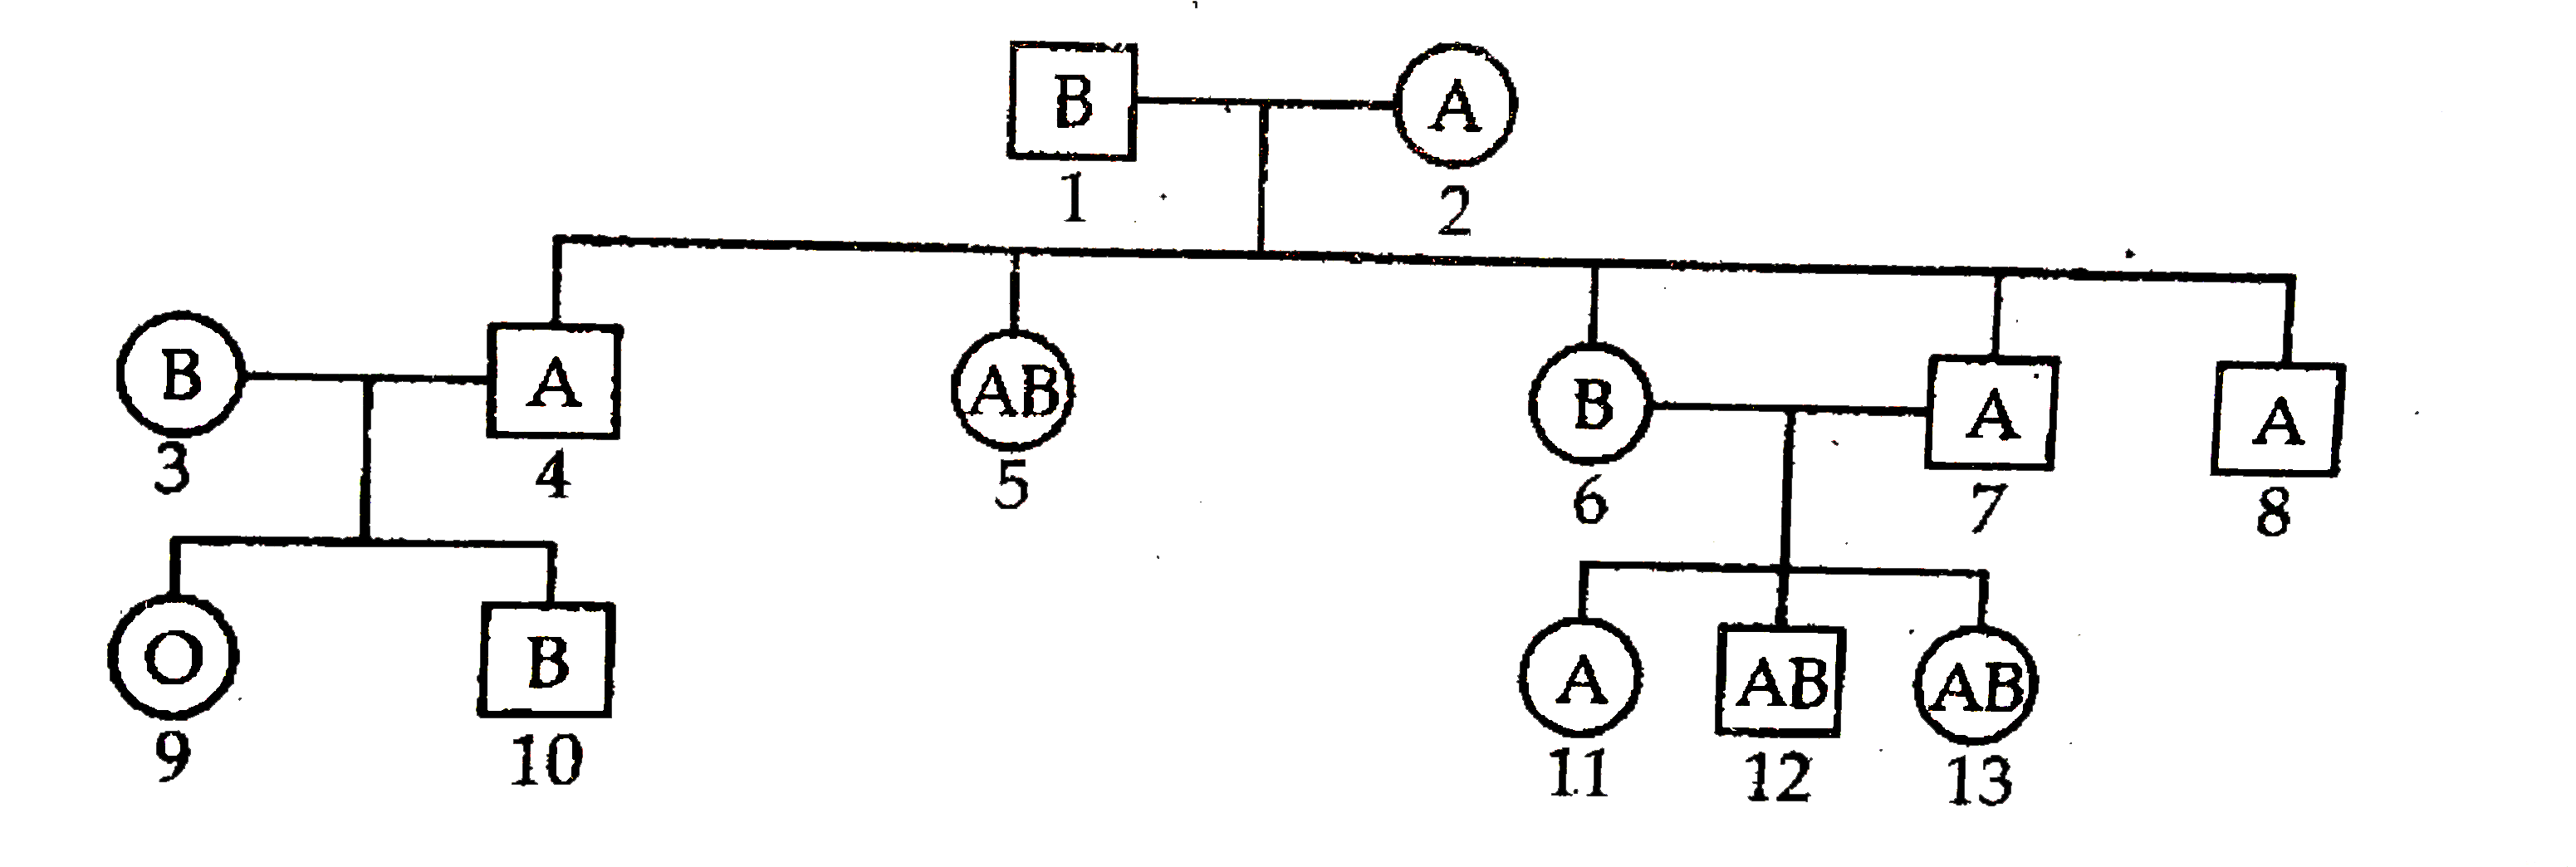 Study the pedigree chart given, showing the Inheritance pattern of blood groups in a family and answer the following questions      (a) Give the possible genotypes of the individuals 1 and 2.    (b) Which antigen or antigens will be present on the plasma membranes of the RBC's of individuals 5 and 9.    (c) Give the genotypes of the individuals 3 and 4.